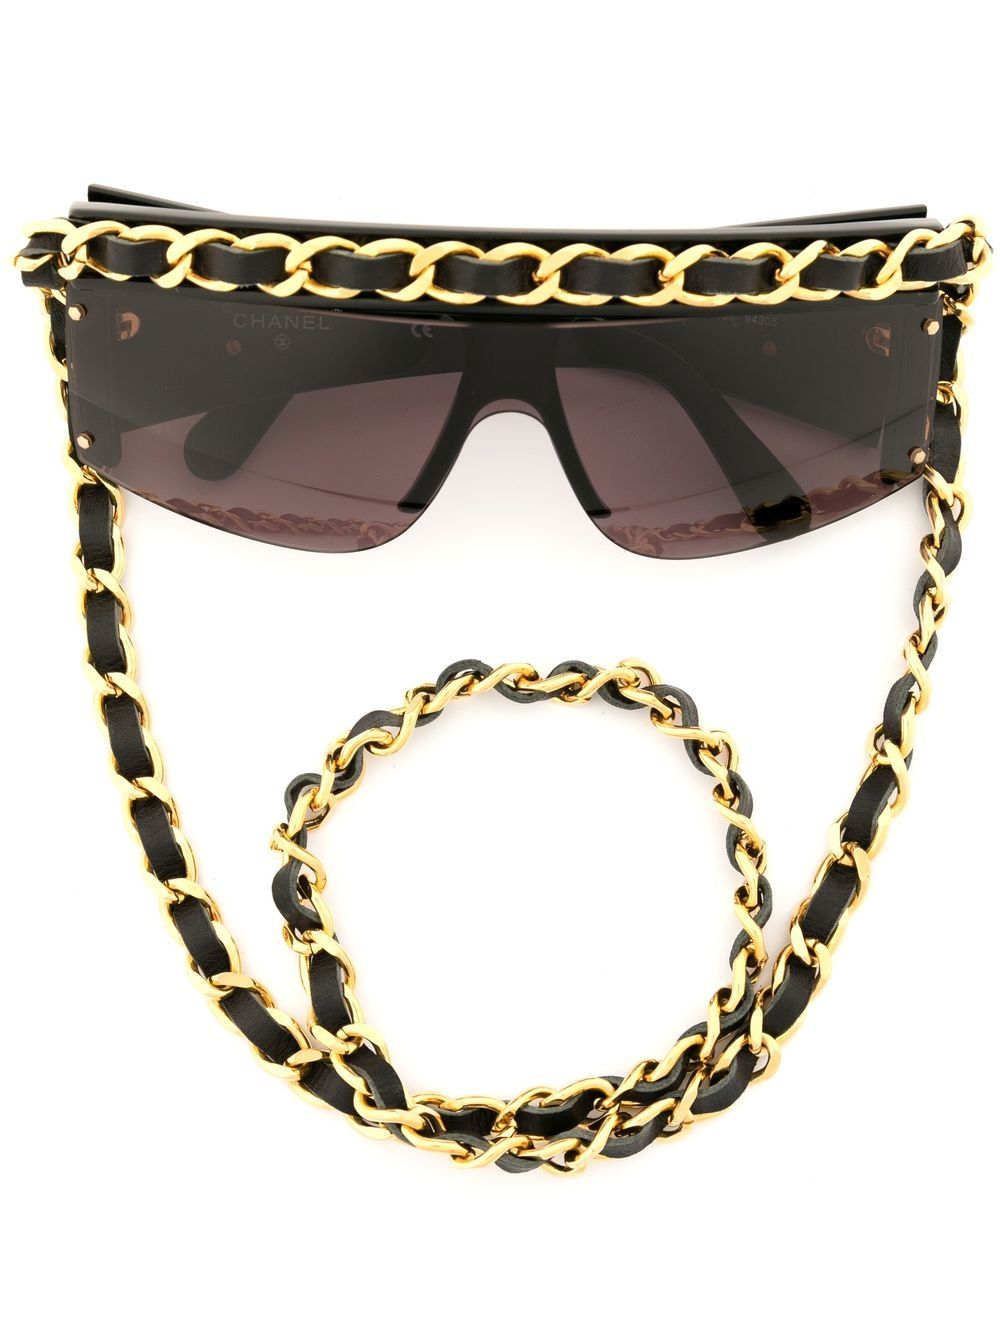 Chanel Pre-Owned 1990-2000s leather-and-chain visor sunglasses - Black